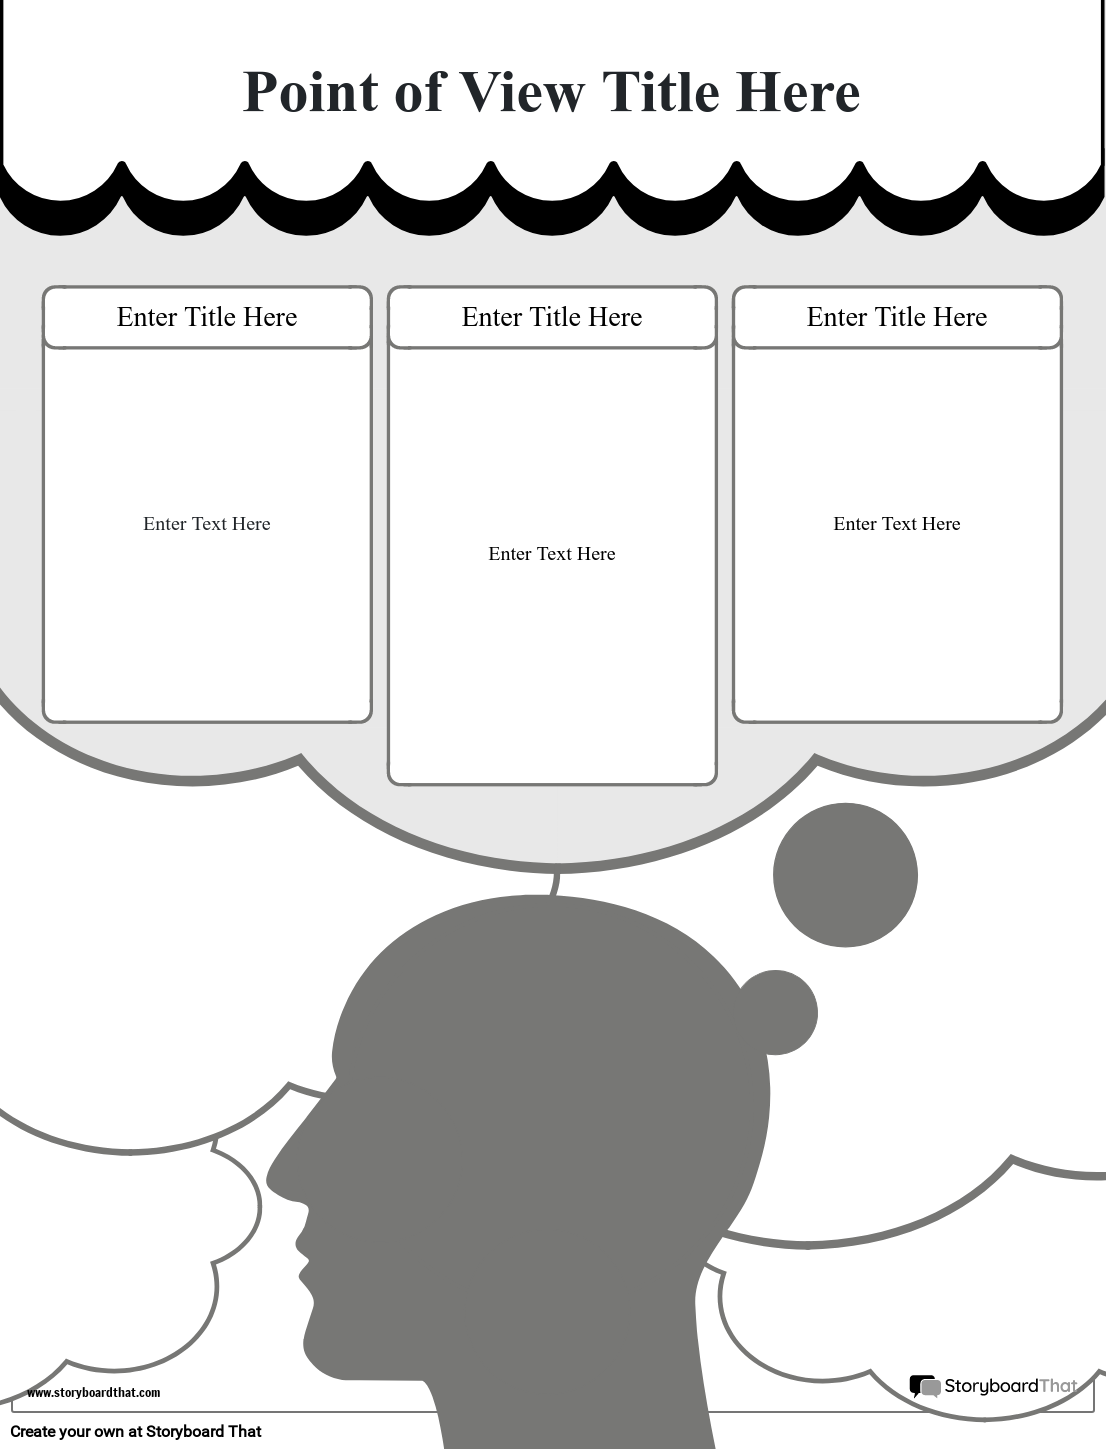 New Create Page Point of View Template 3 (Black & White)